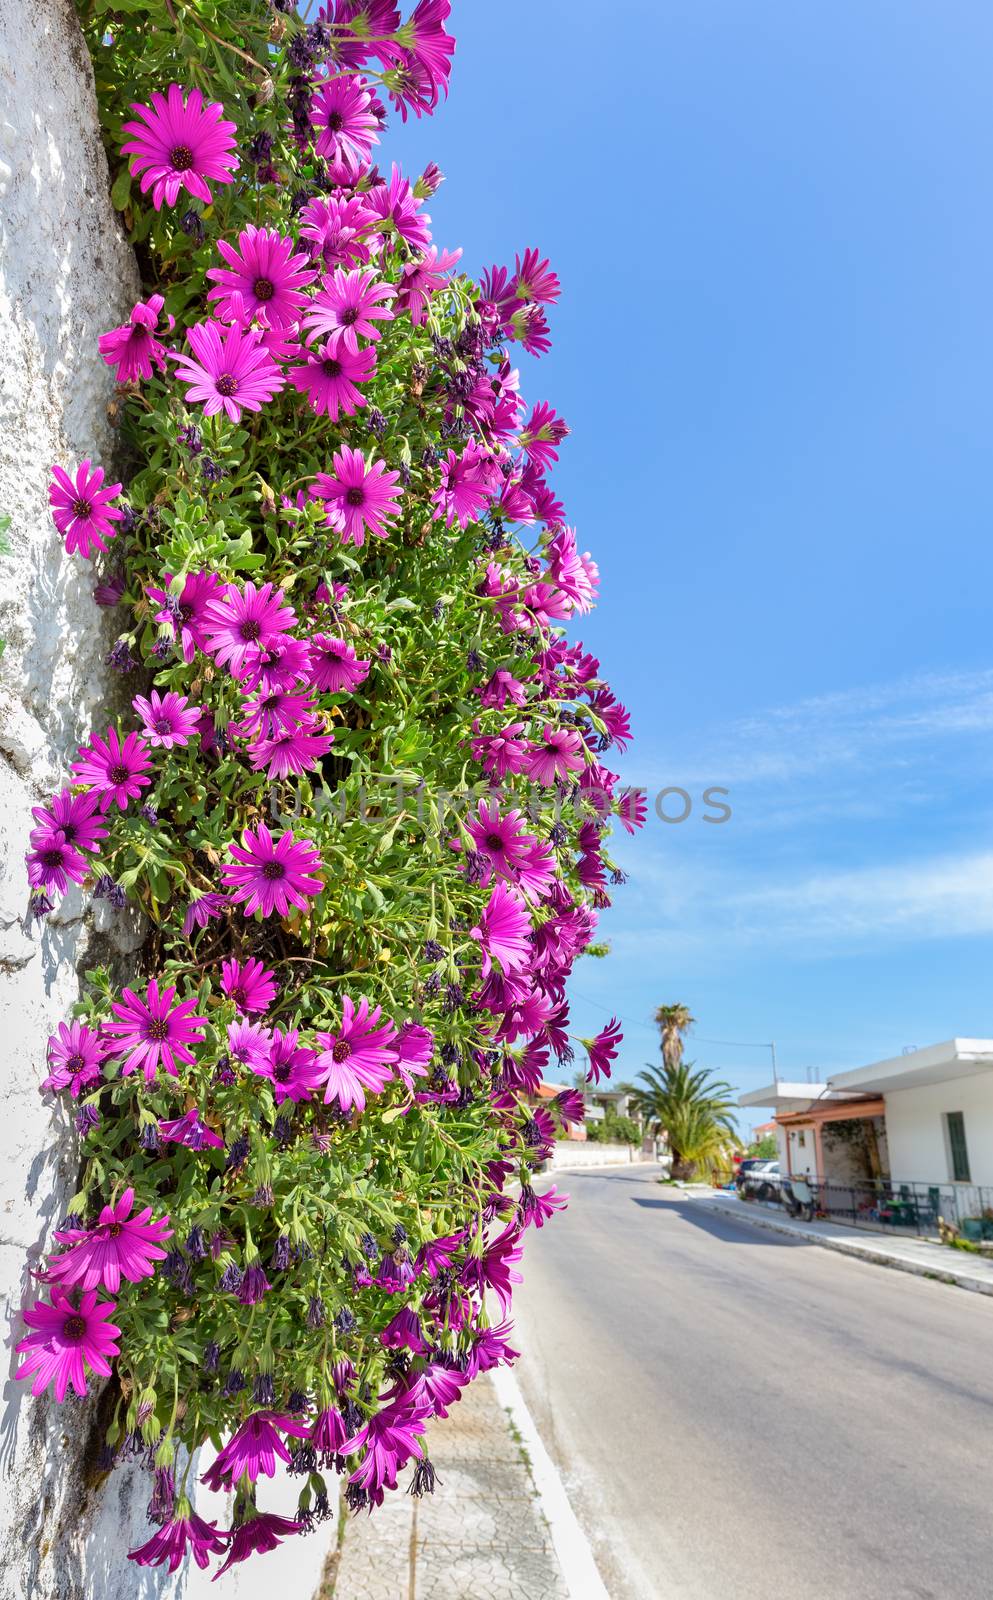 Hanging pink spanish daisies on wall near street by BenSchonewille